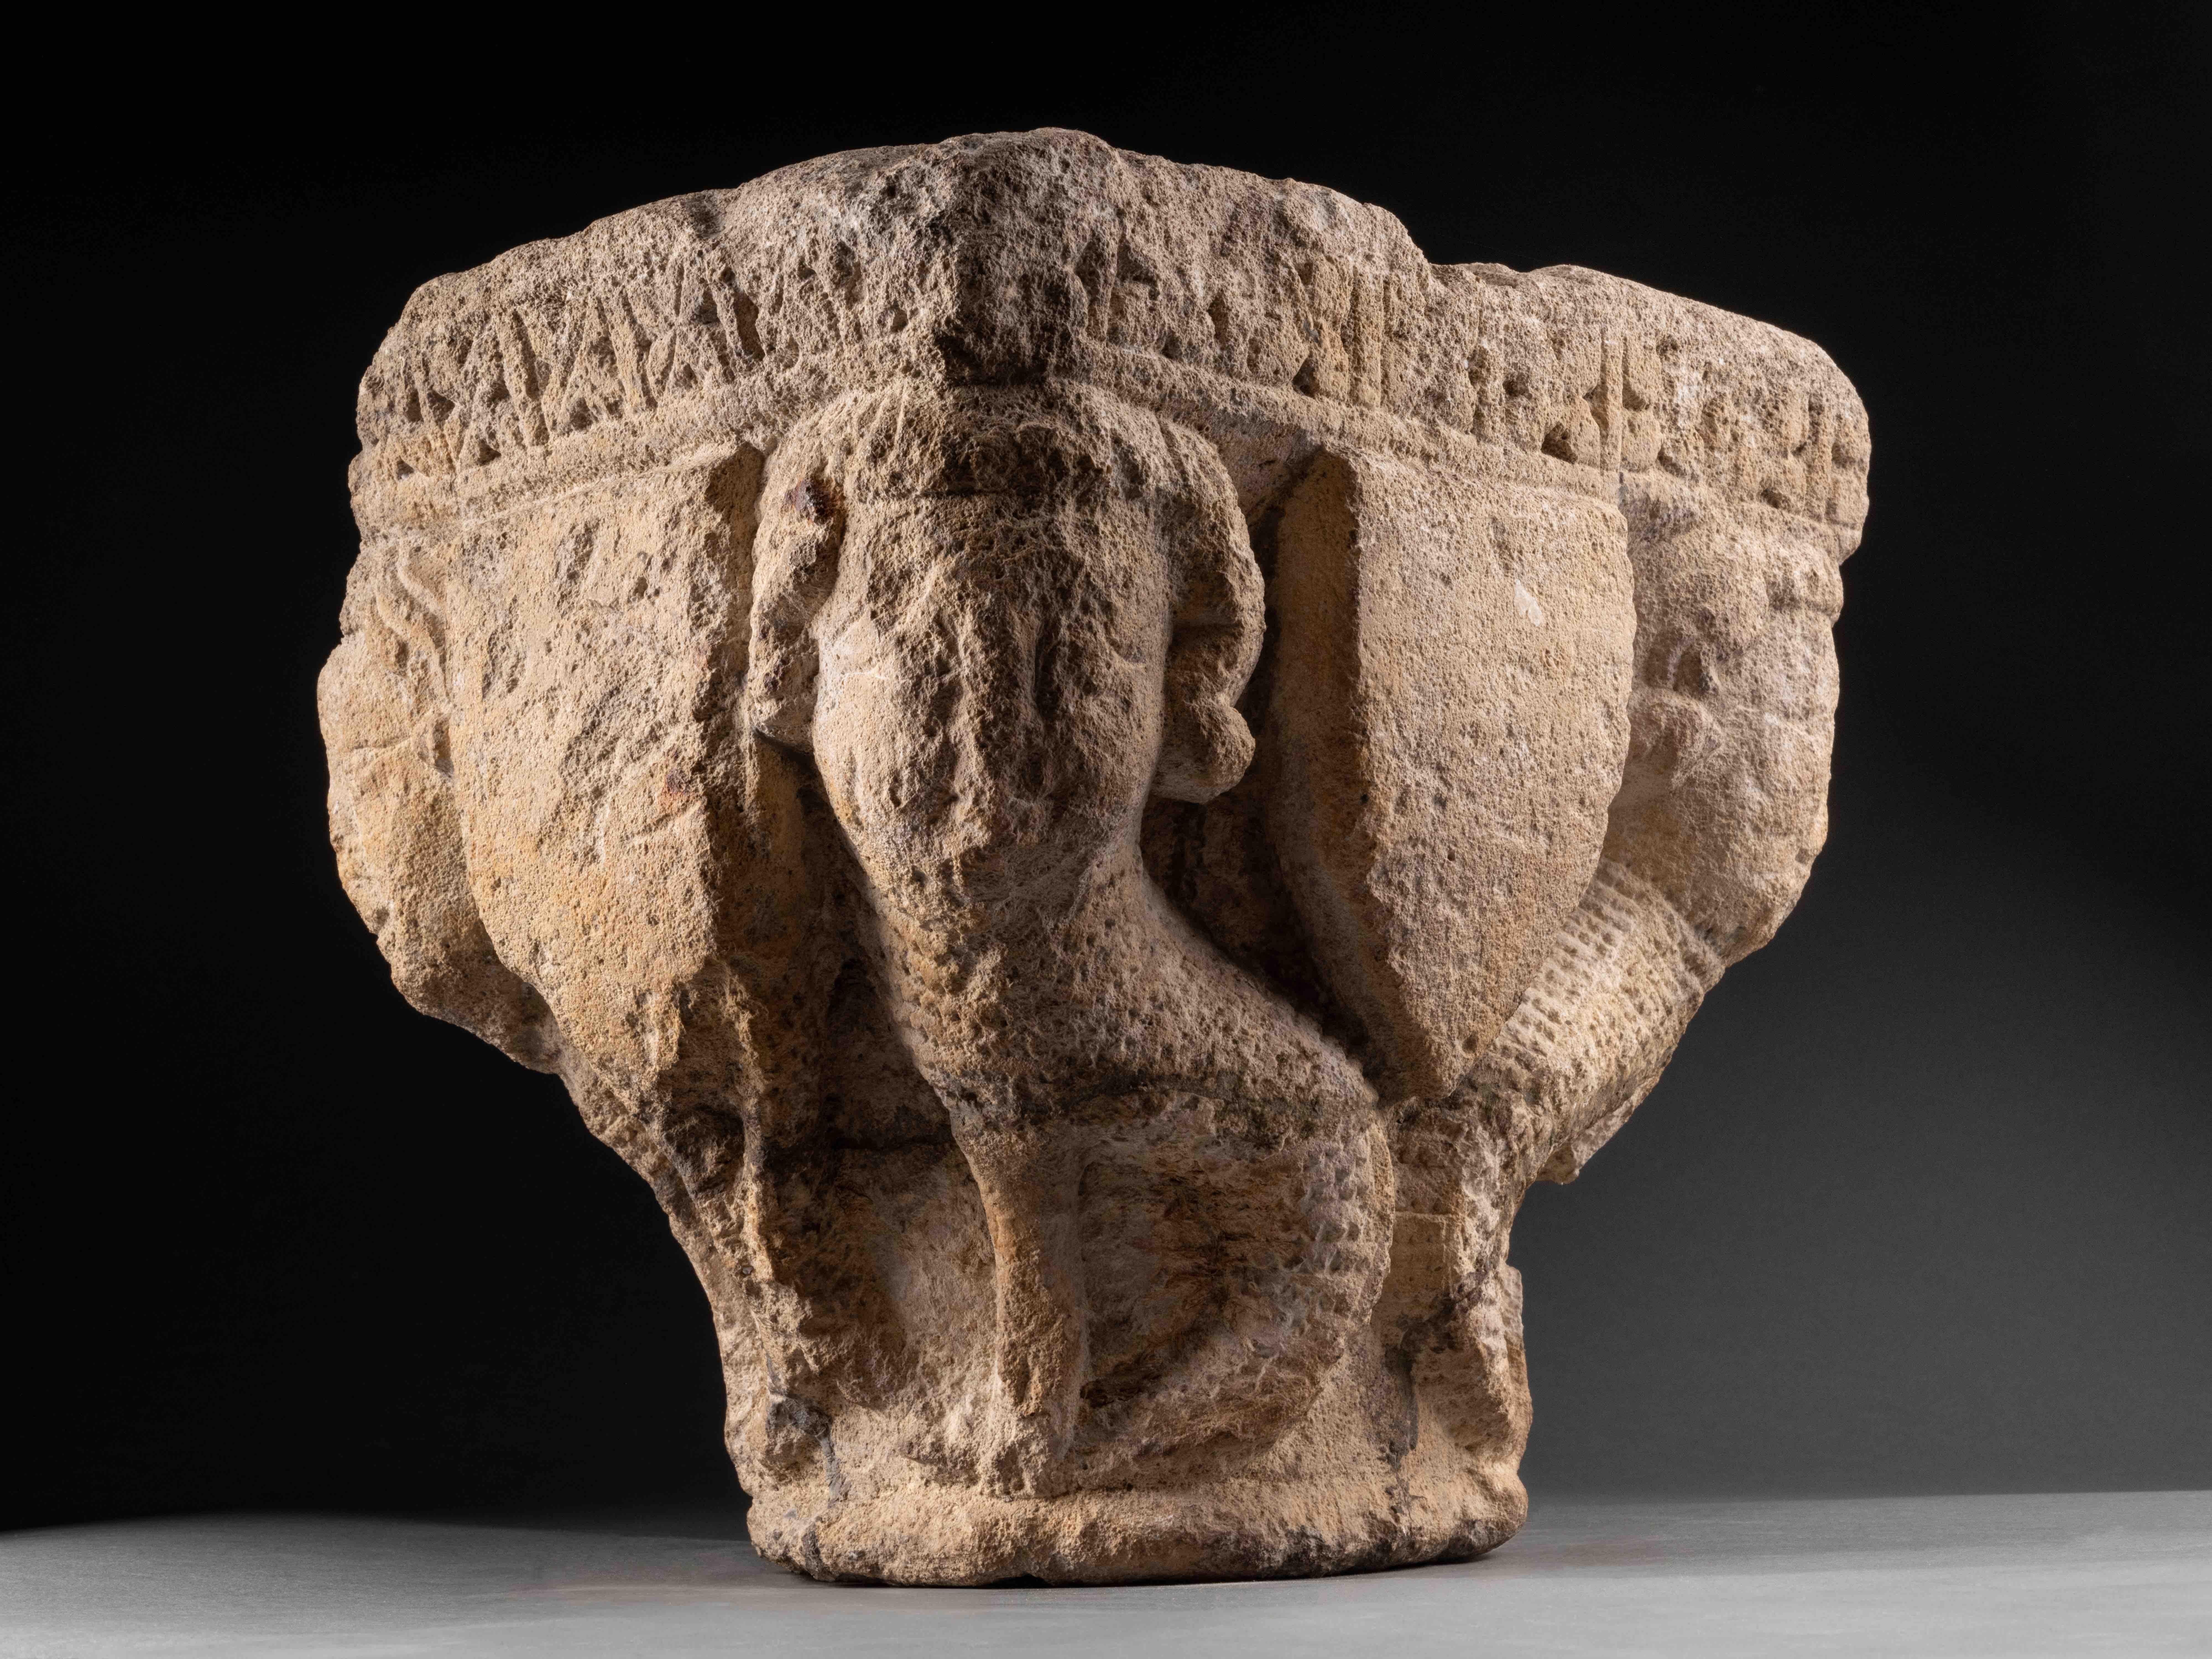 Rare romanesque capital with sirens
France, XIII century
Limestone 
25 x 28 x 22 cm


This finely carved Romanesque capital, executed in high relief from limestone, features four hybrid figures resembling harpies (or sirens), positioned at the